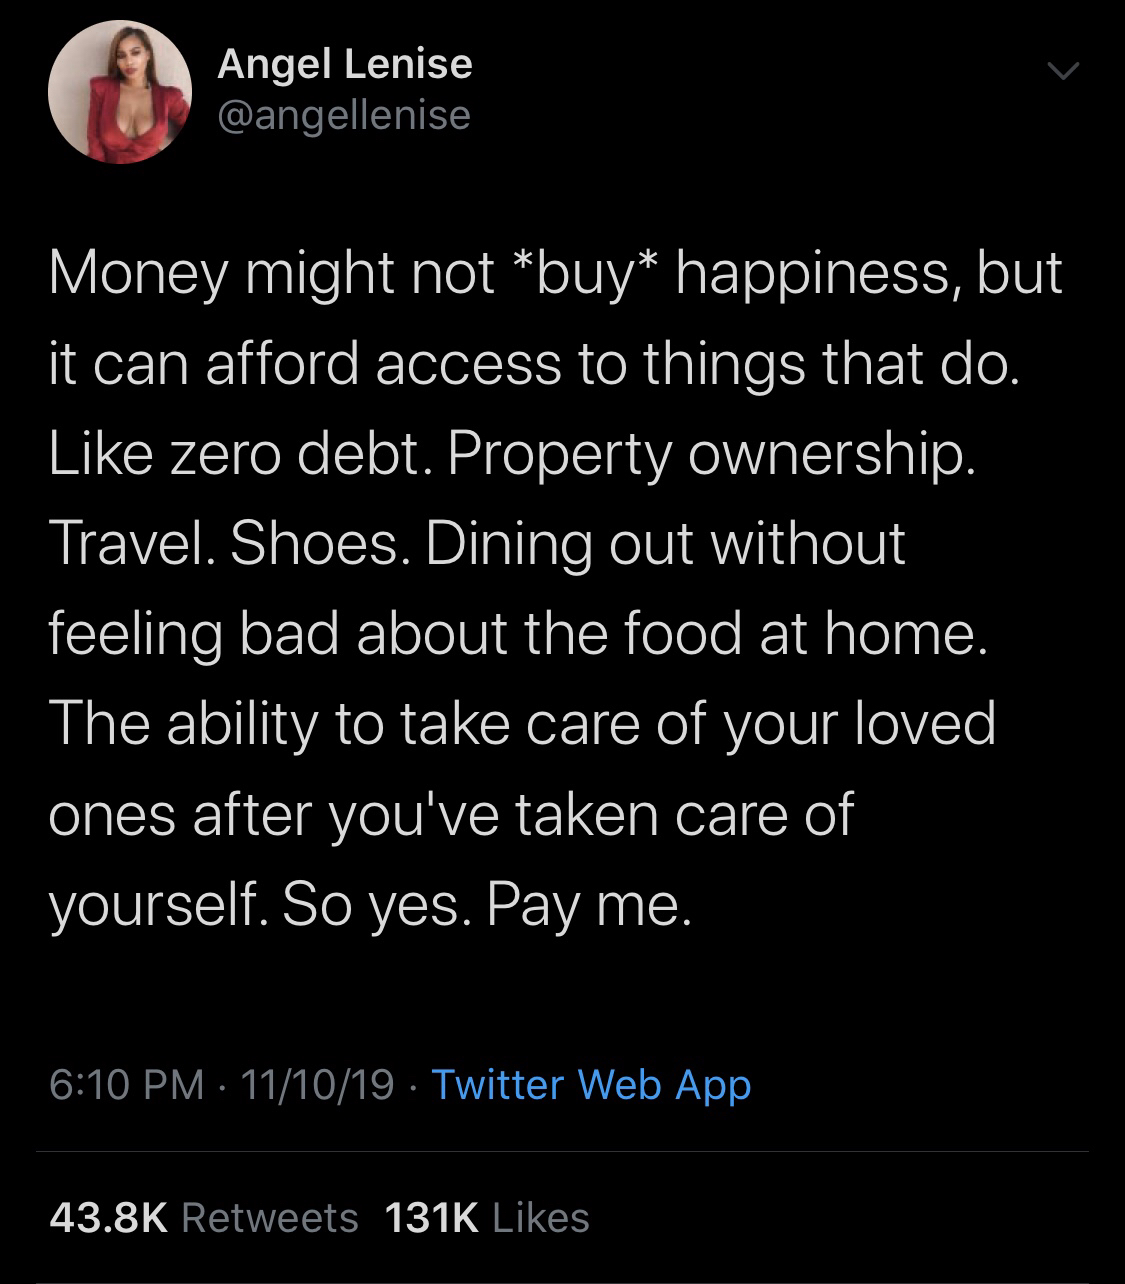 black twitter -  Angel Lenise Money might not buy happiness, but it can afford access to things that do. zero debt. Property ownership. Travel. Shoes. Dining out without feeling bad about the food at home. The ability to take care of your loved ones after